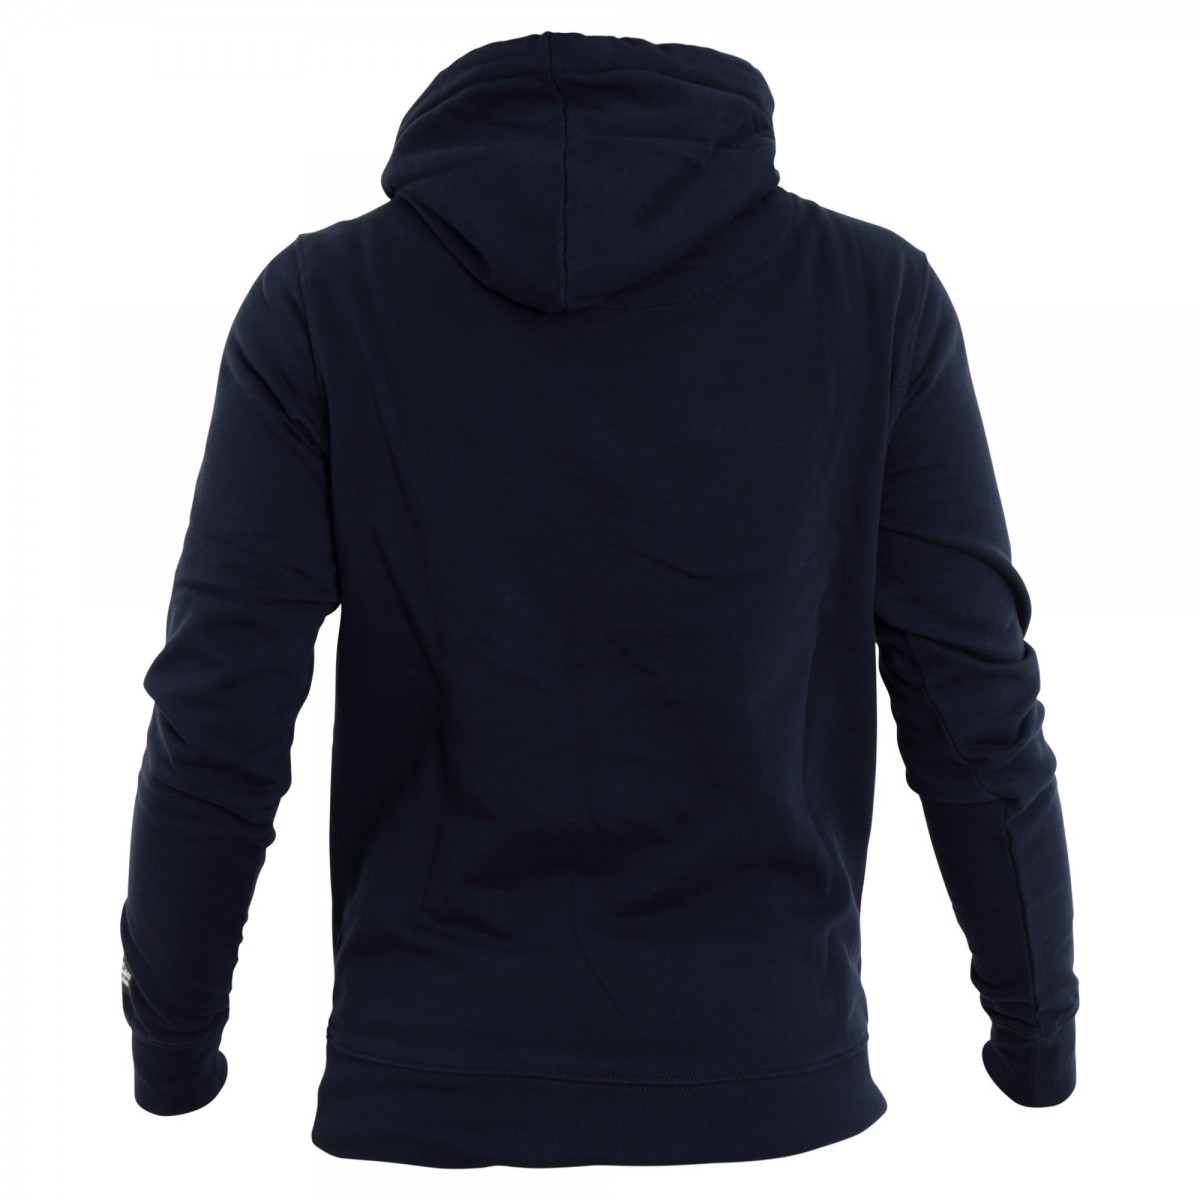 SWEATER HOODED